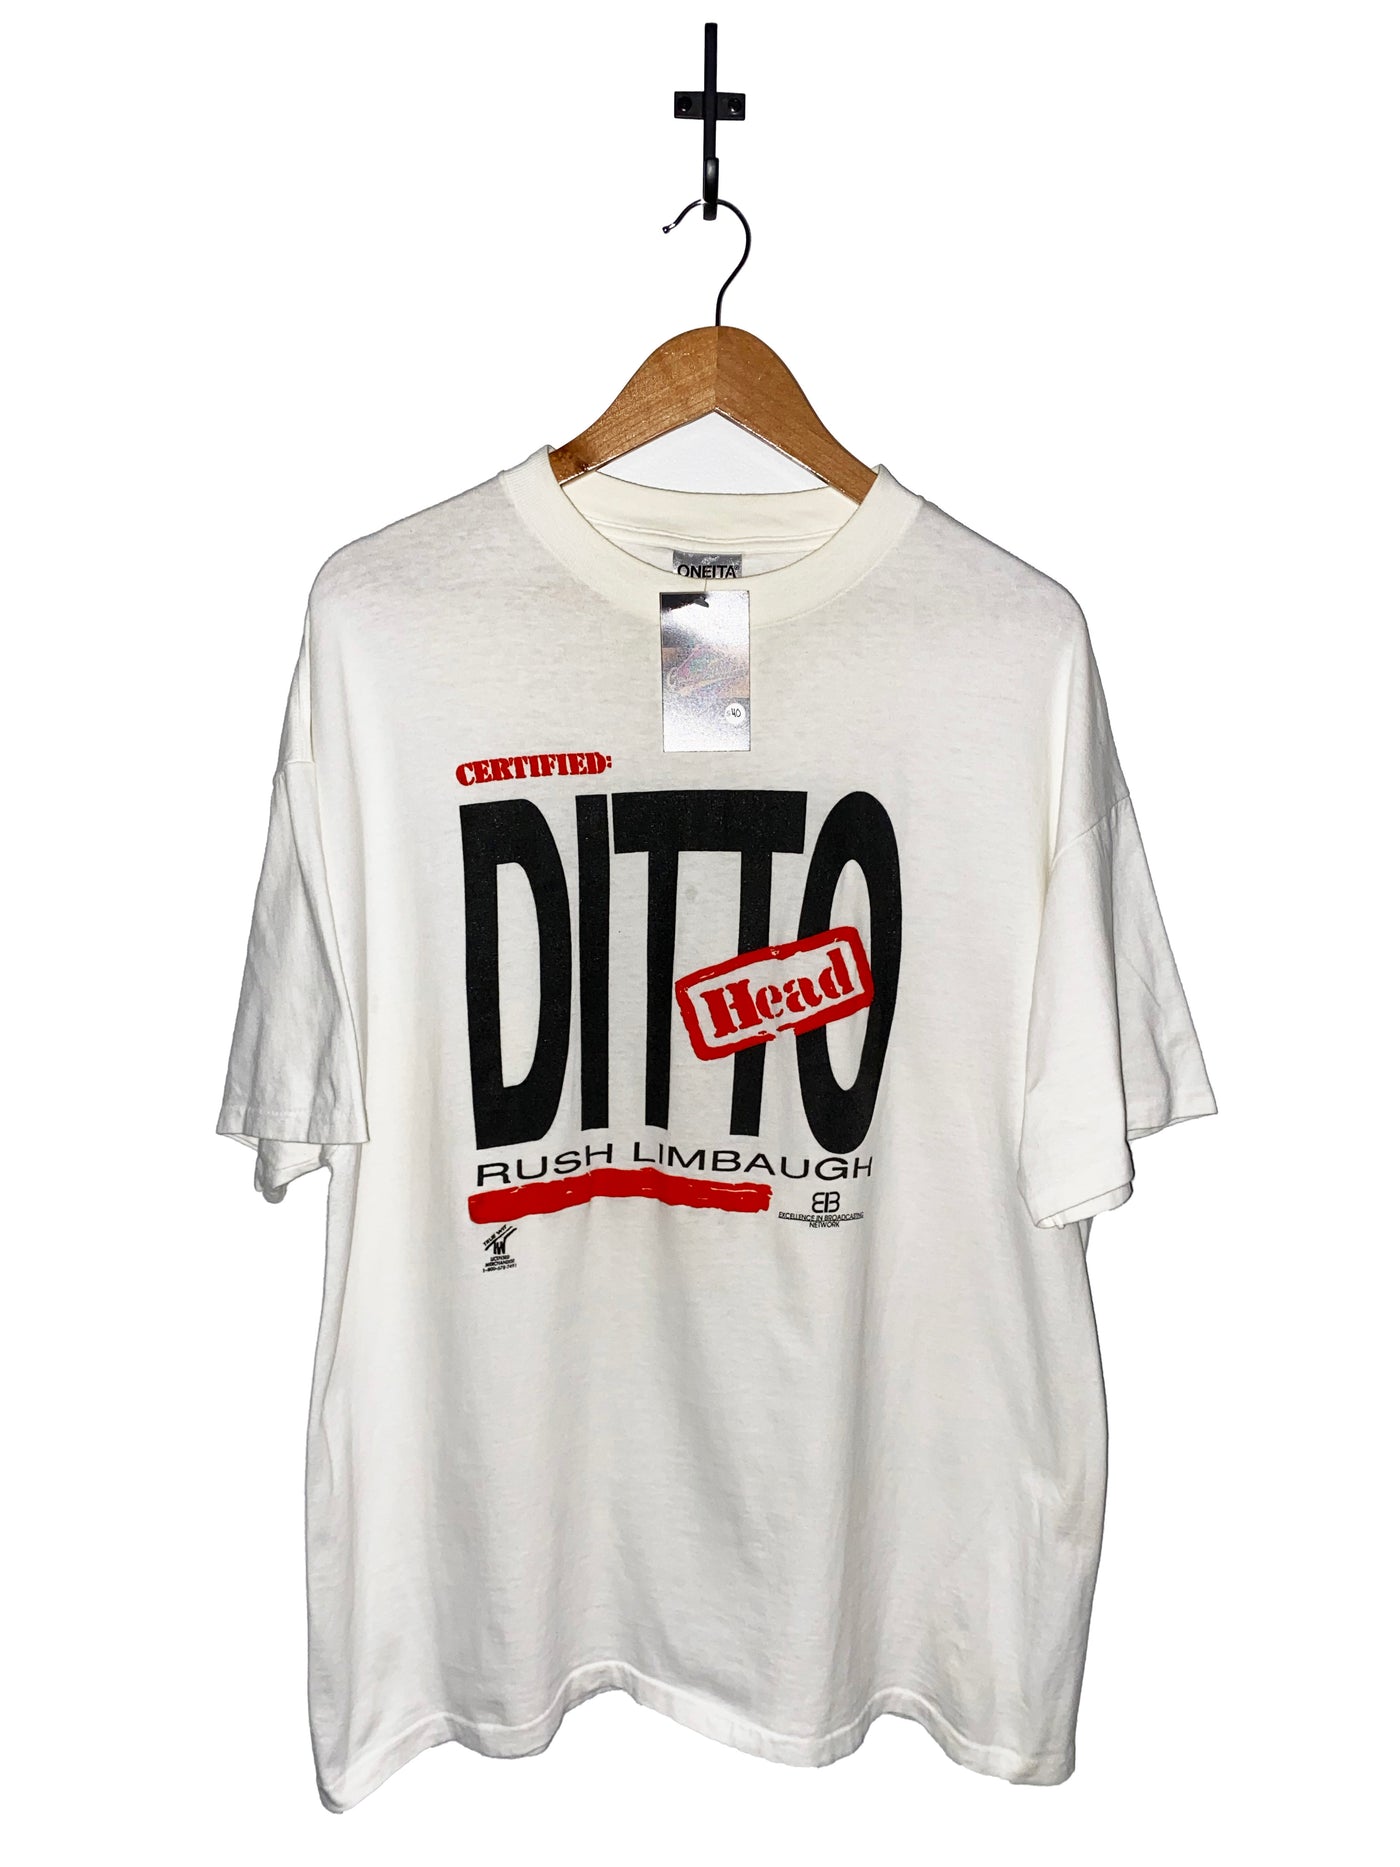 Vintage Rush Limbaugh ‘Certified Ditto Head’ Puff Print T-Shirt